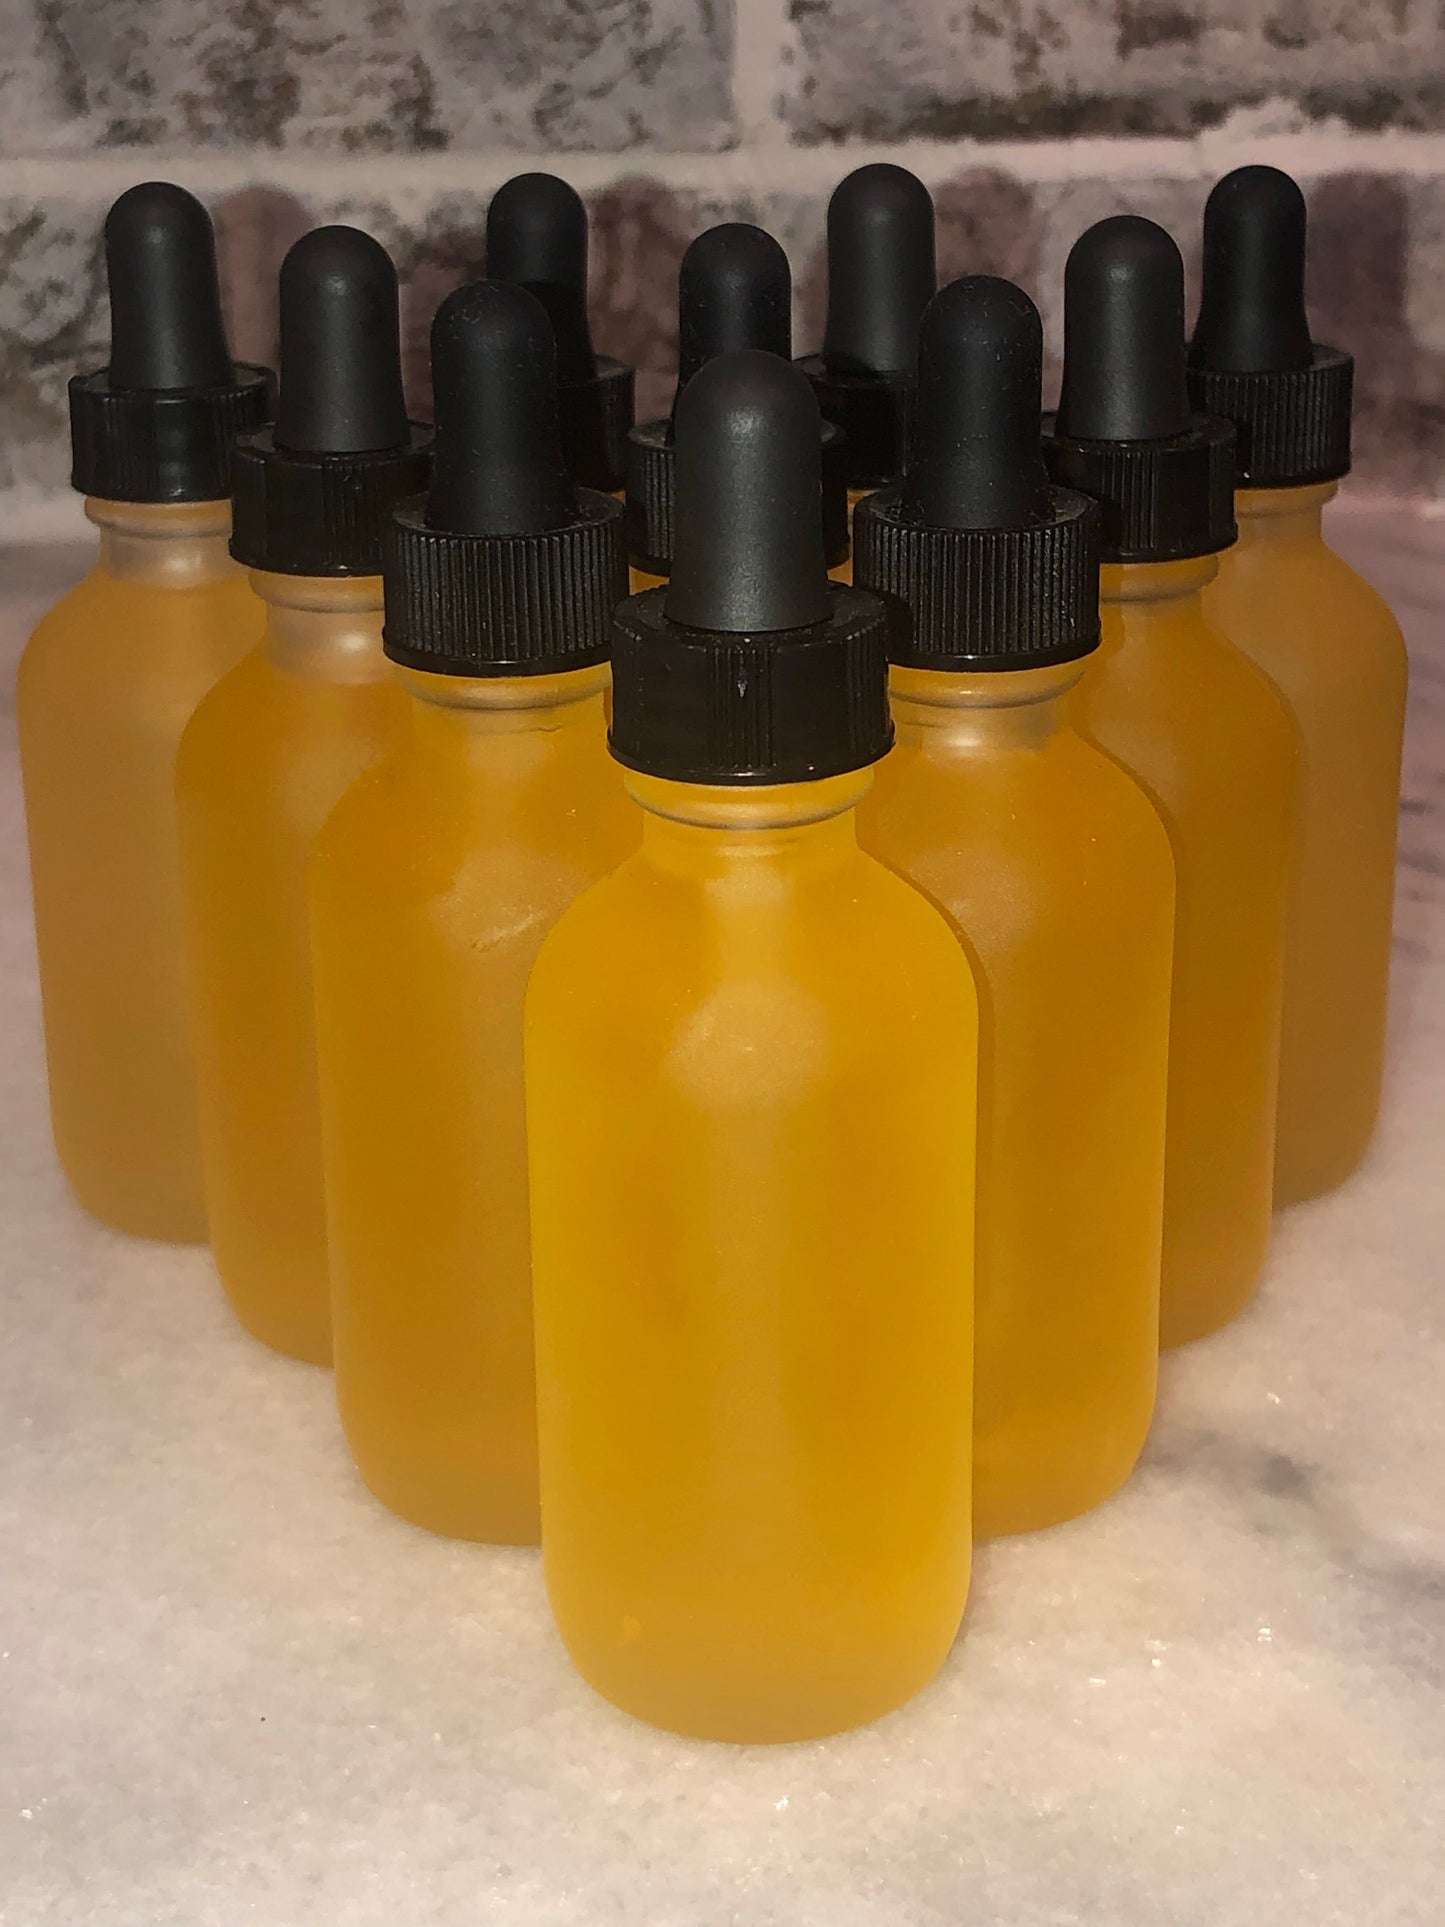 Clarity Cleansing oil